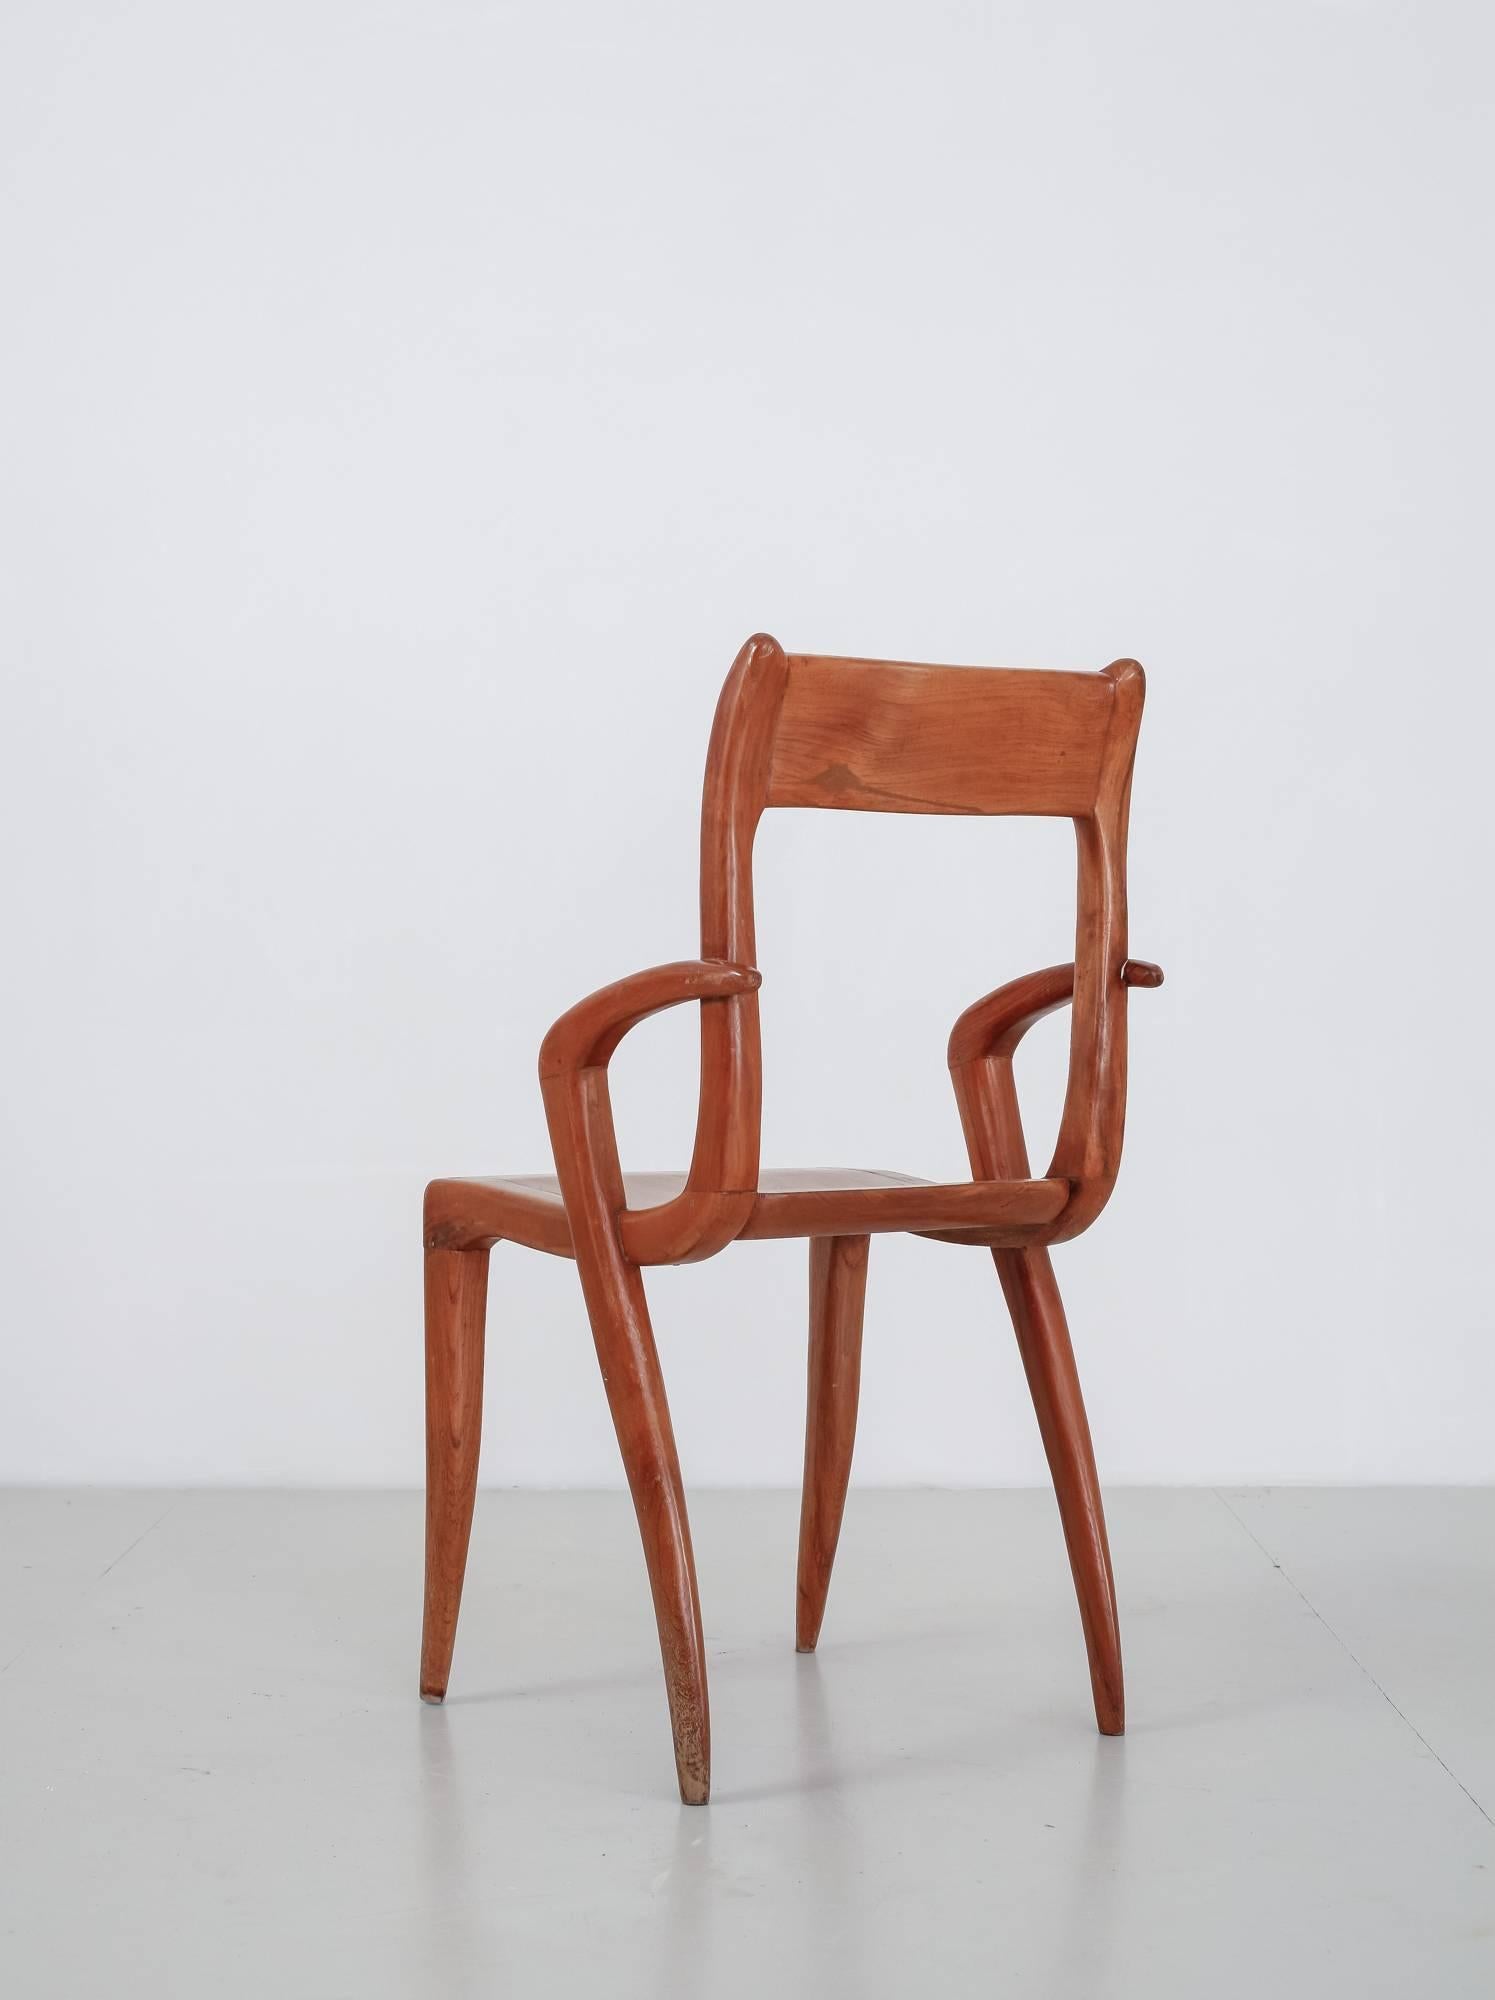 A Mid-Century American wooden craft armchair with an organic shape, reminiscent of the work of Arthur Espenet. The chair has saber legs of which the ones in the back extend into the armrests.
 